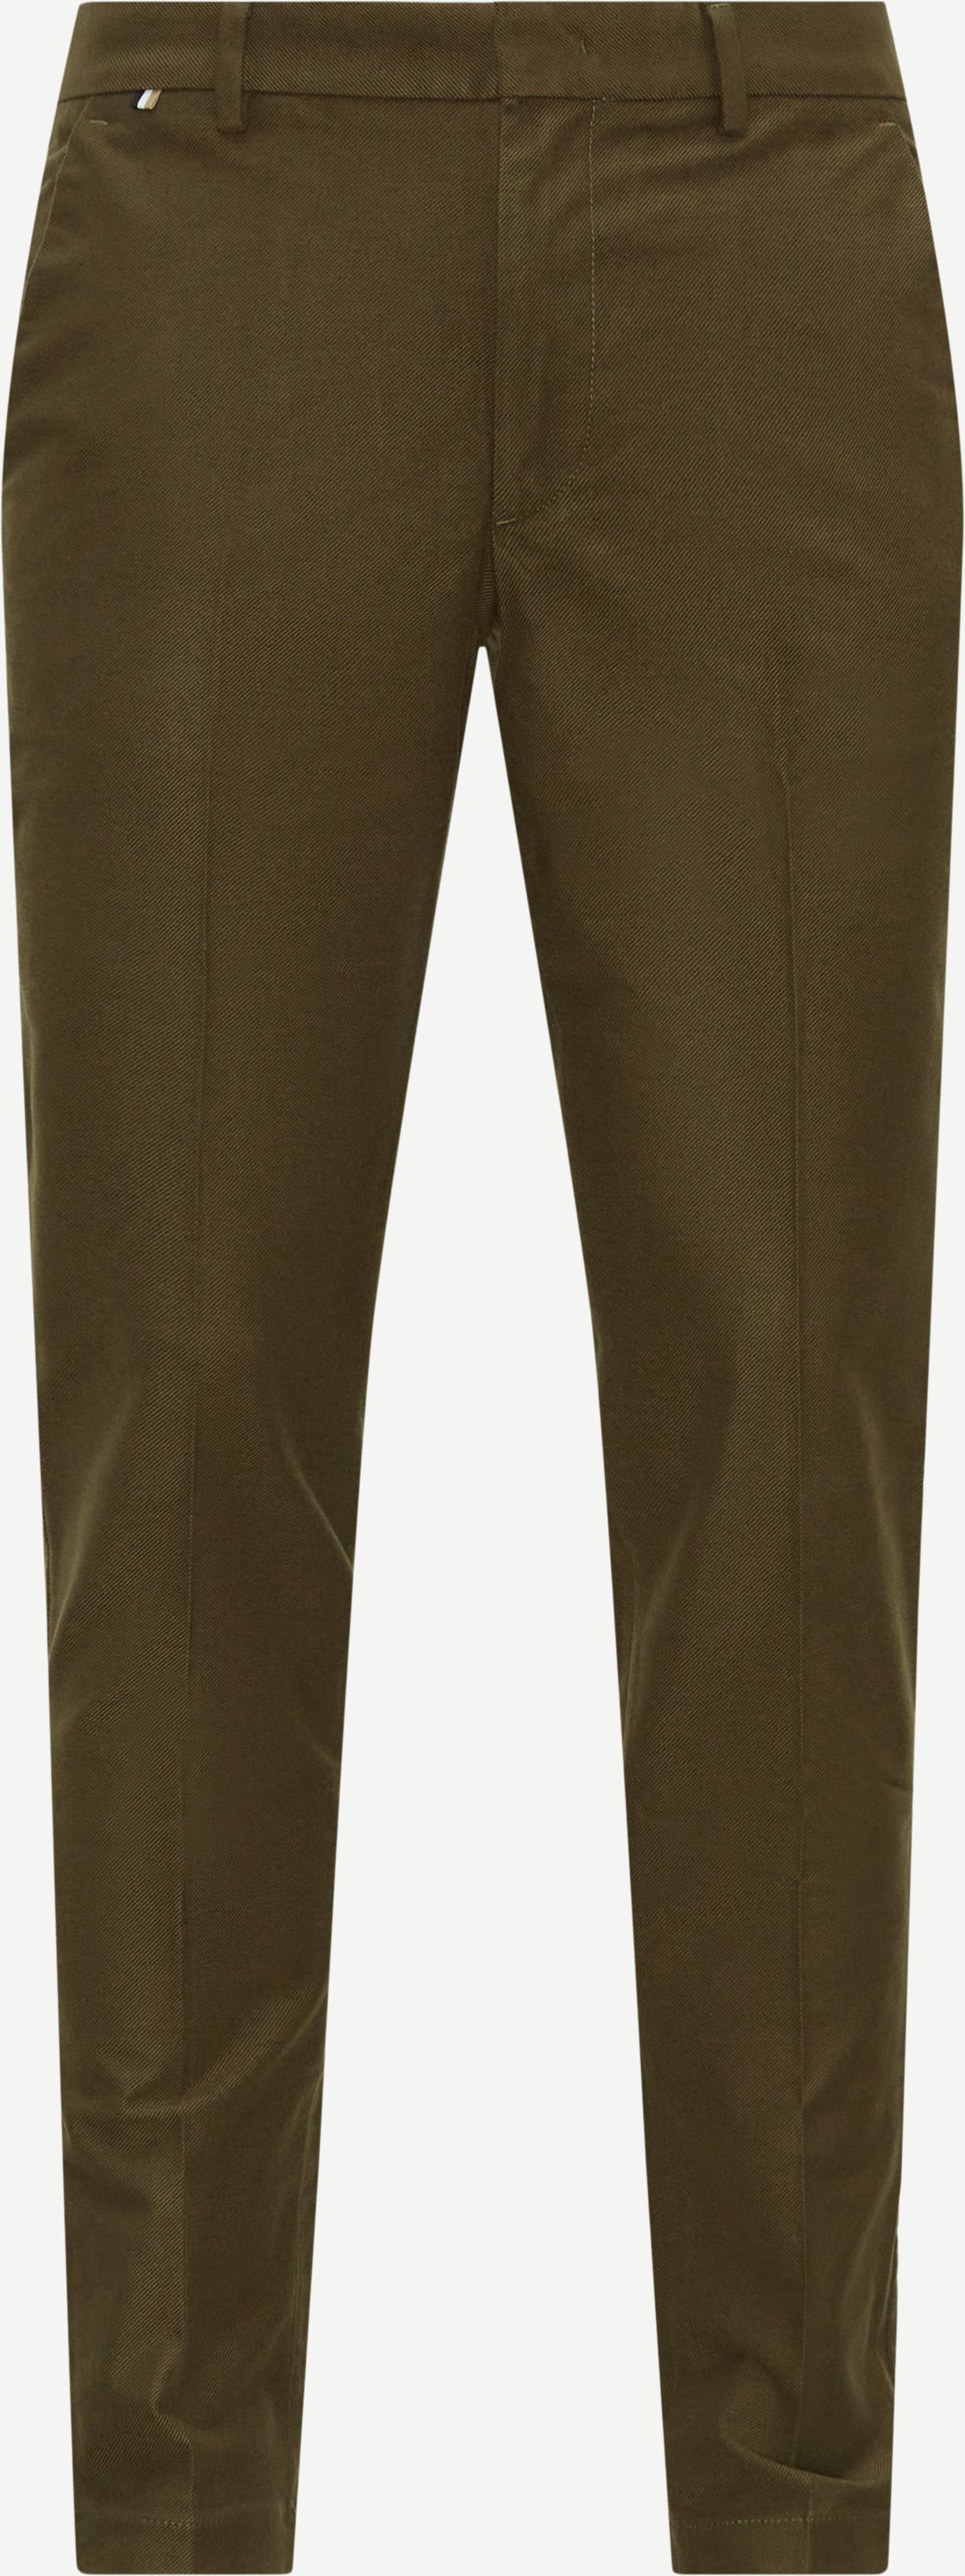 BOSS Trousers 50499643 KAITO1 Army